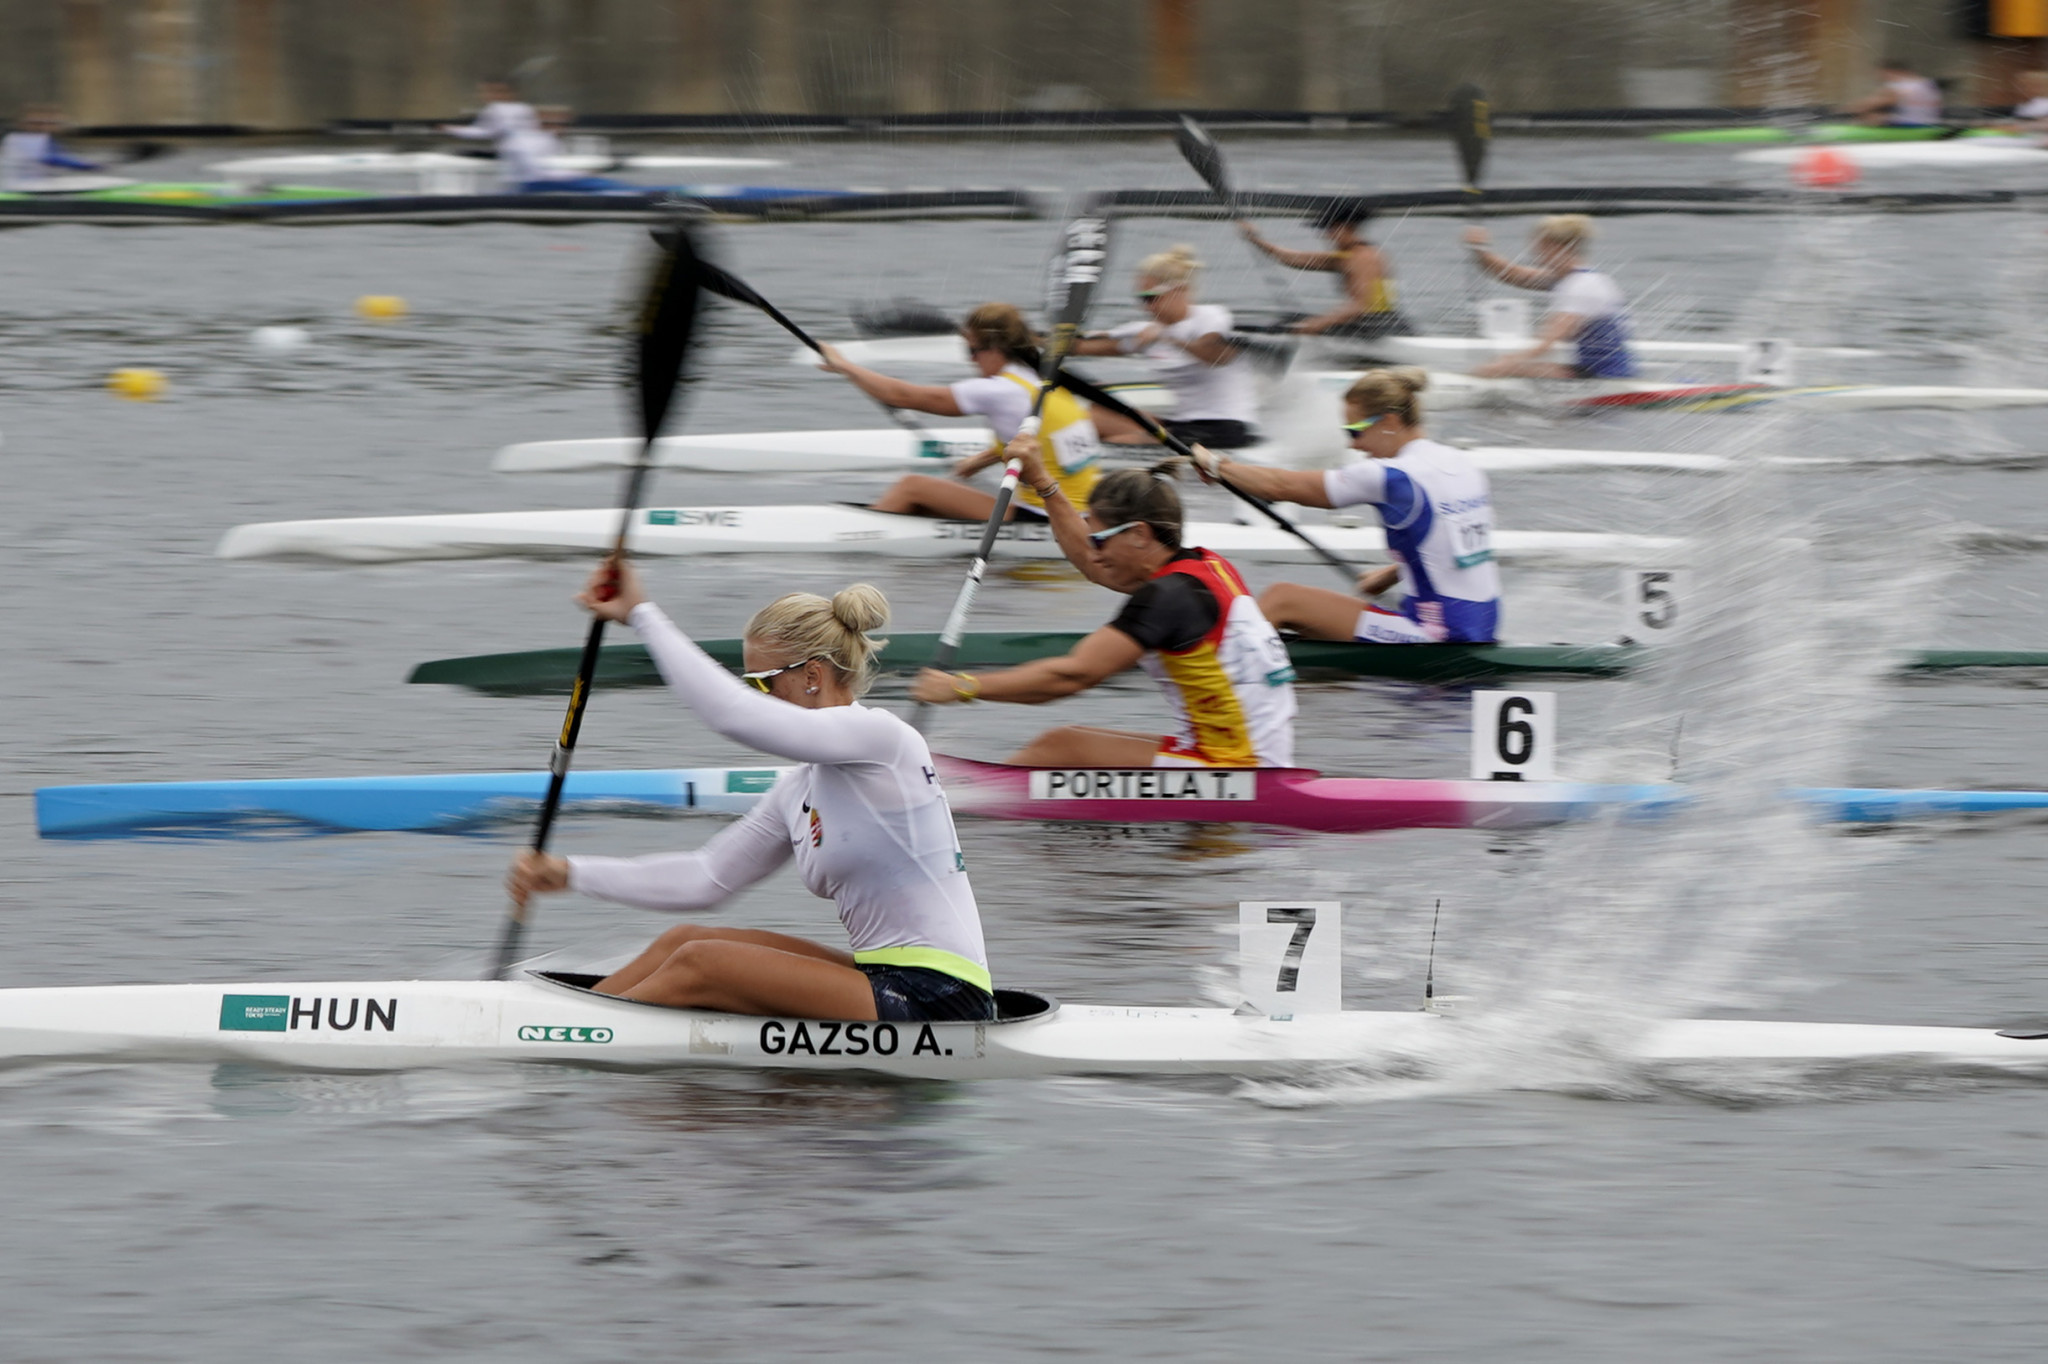 World champions ease into K2 1,000m semi-finals at Tokyo 2020 canoe sprint test event